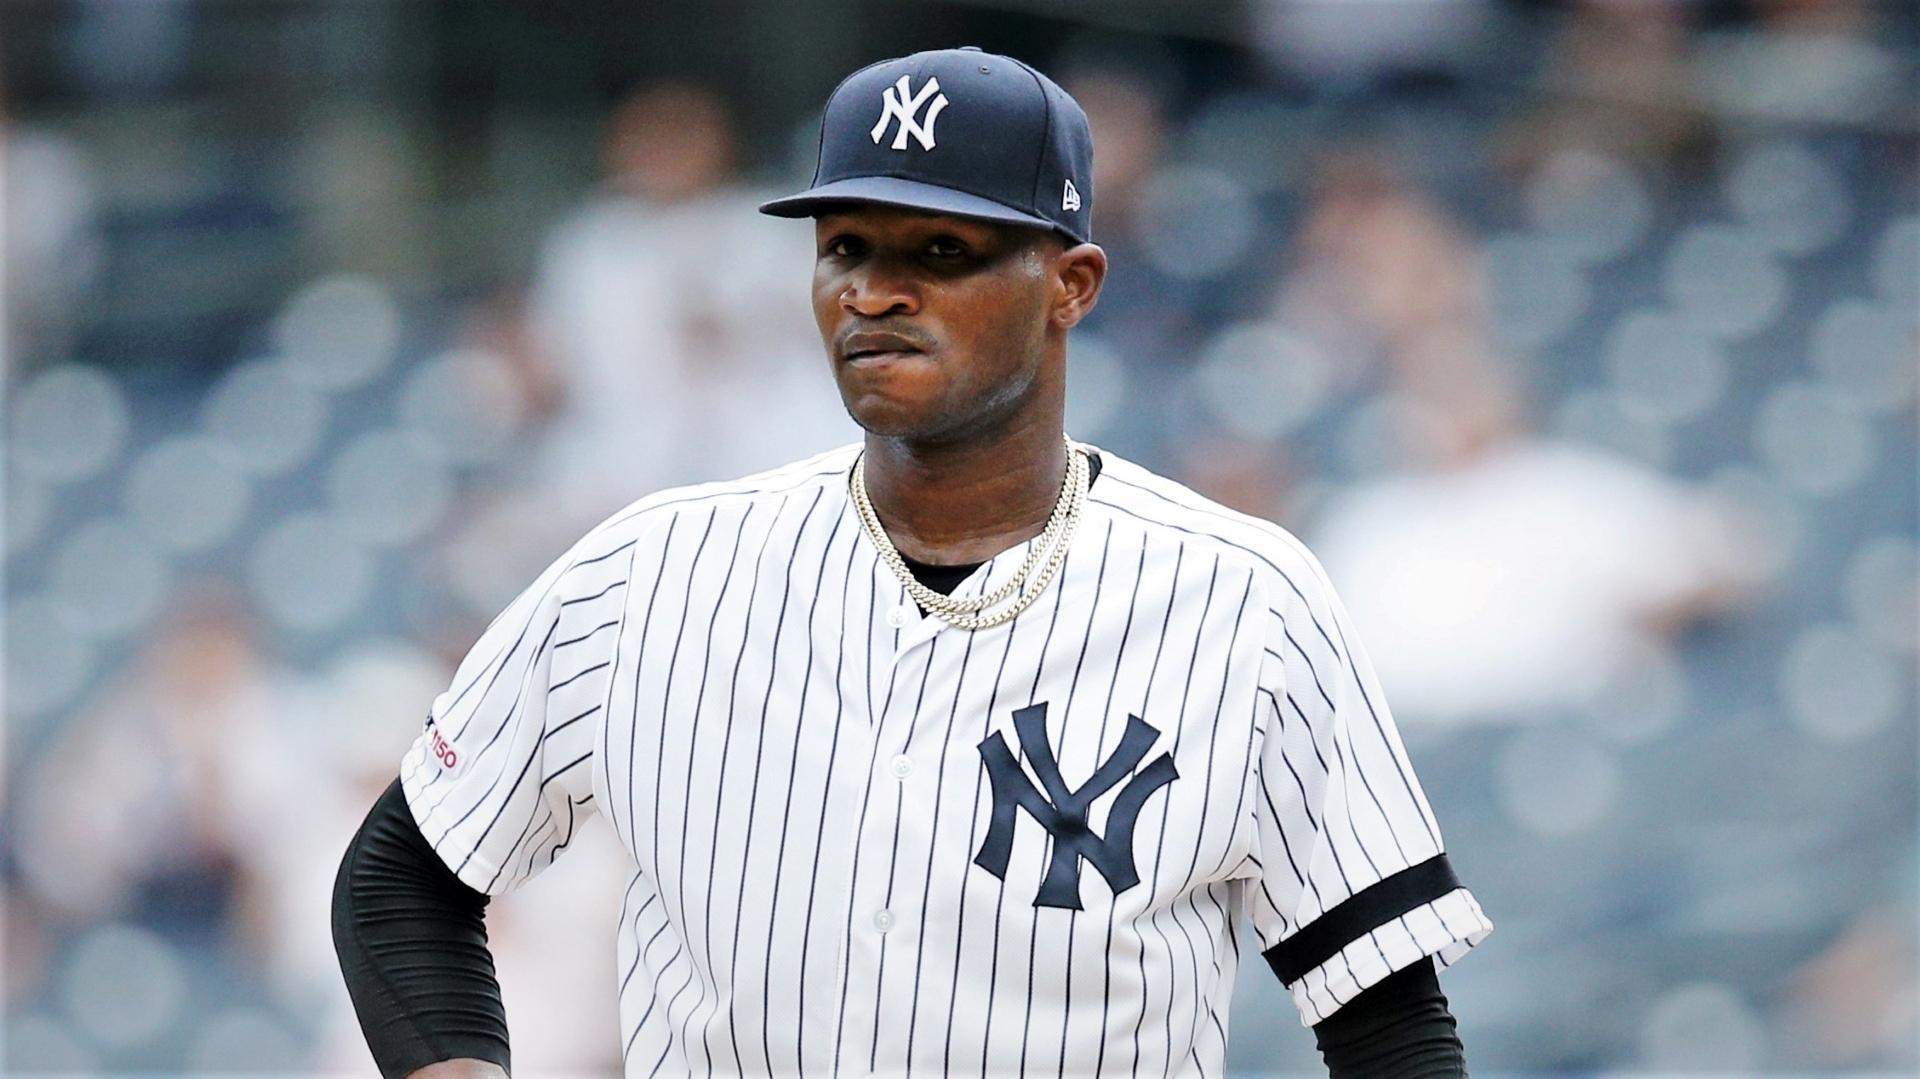 Jul 18, 2019; Bronx, NY, USA; New York Yankees starting pitcher Domingo German (55) reacts after allowing a solo home run to Tampa Bay Rays third baseman Yandy Diaz (not pictured) during the first inning of the first game of a doubleheader at Yankee Stadium. Mandatory Credit: Brad Penner-USA TODAY Sports / © Brad Penner-USA TODAY Sports